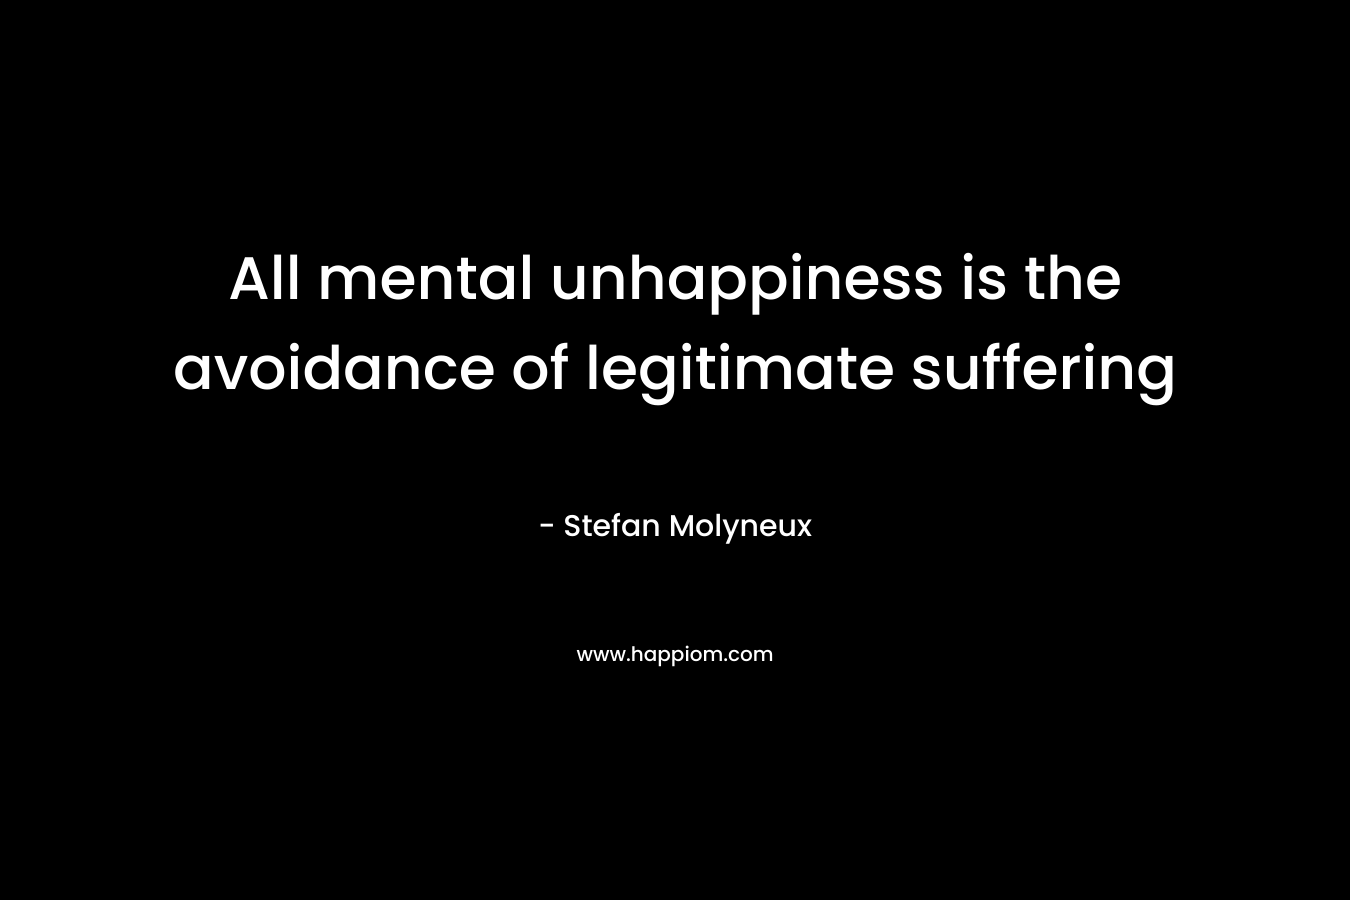 All mental unhappiness is the avoidance of legitimate suffering